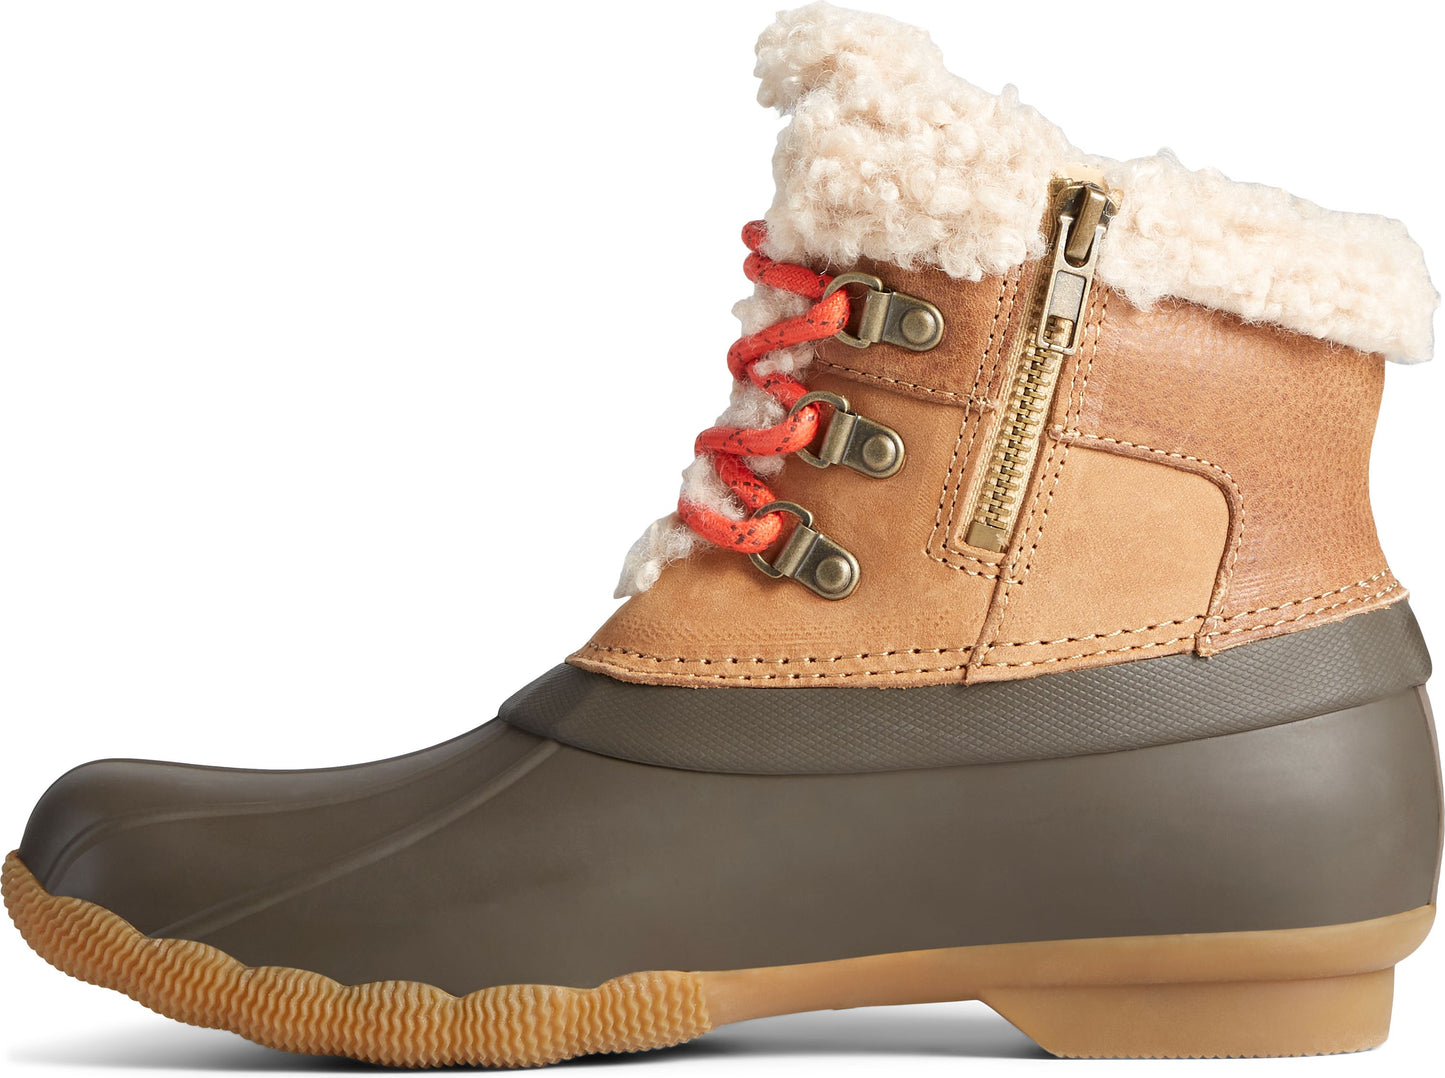 Sperry Boots Saltwater Alpine Leather Tan